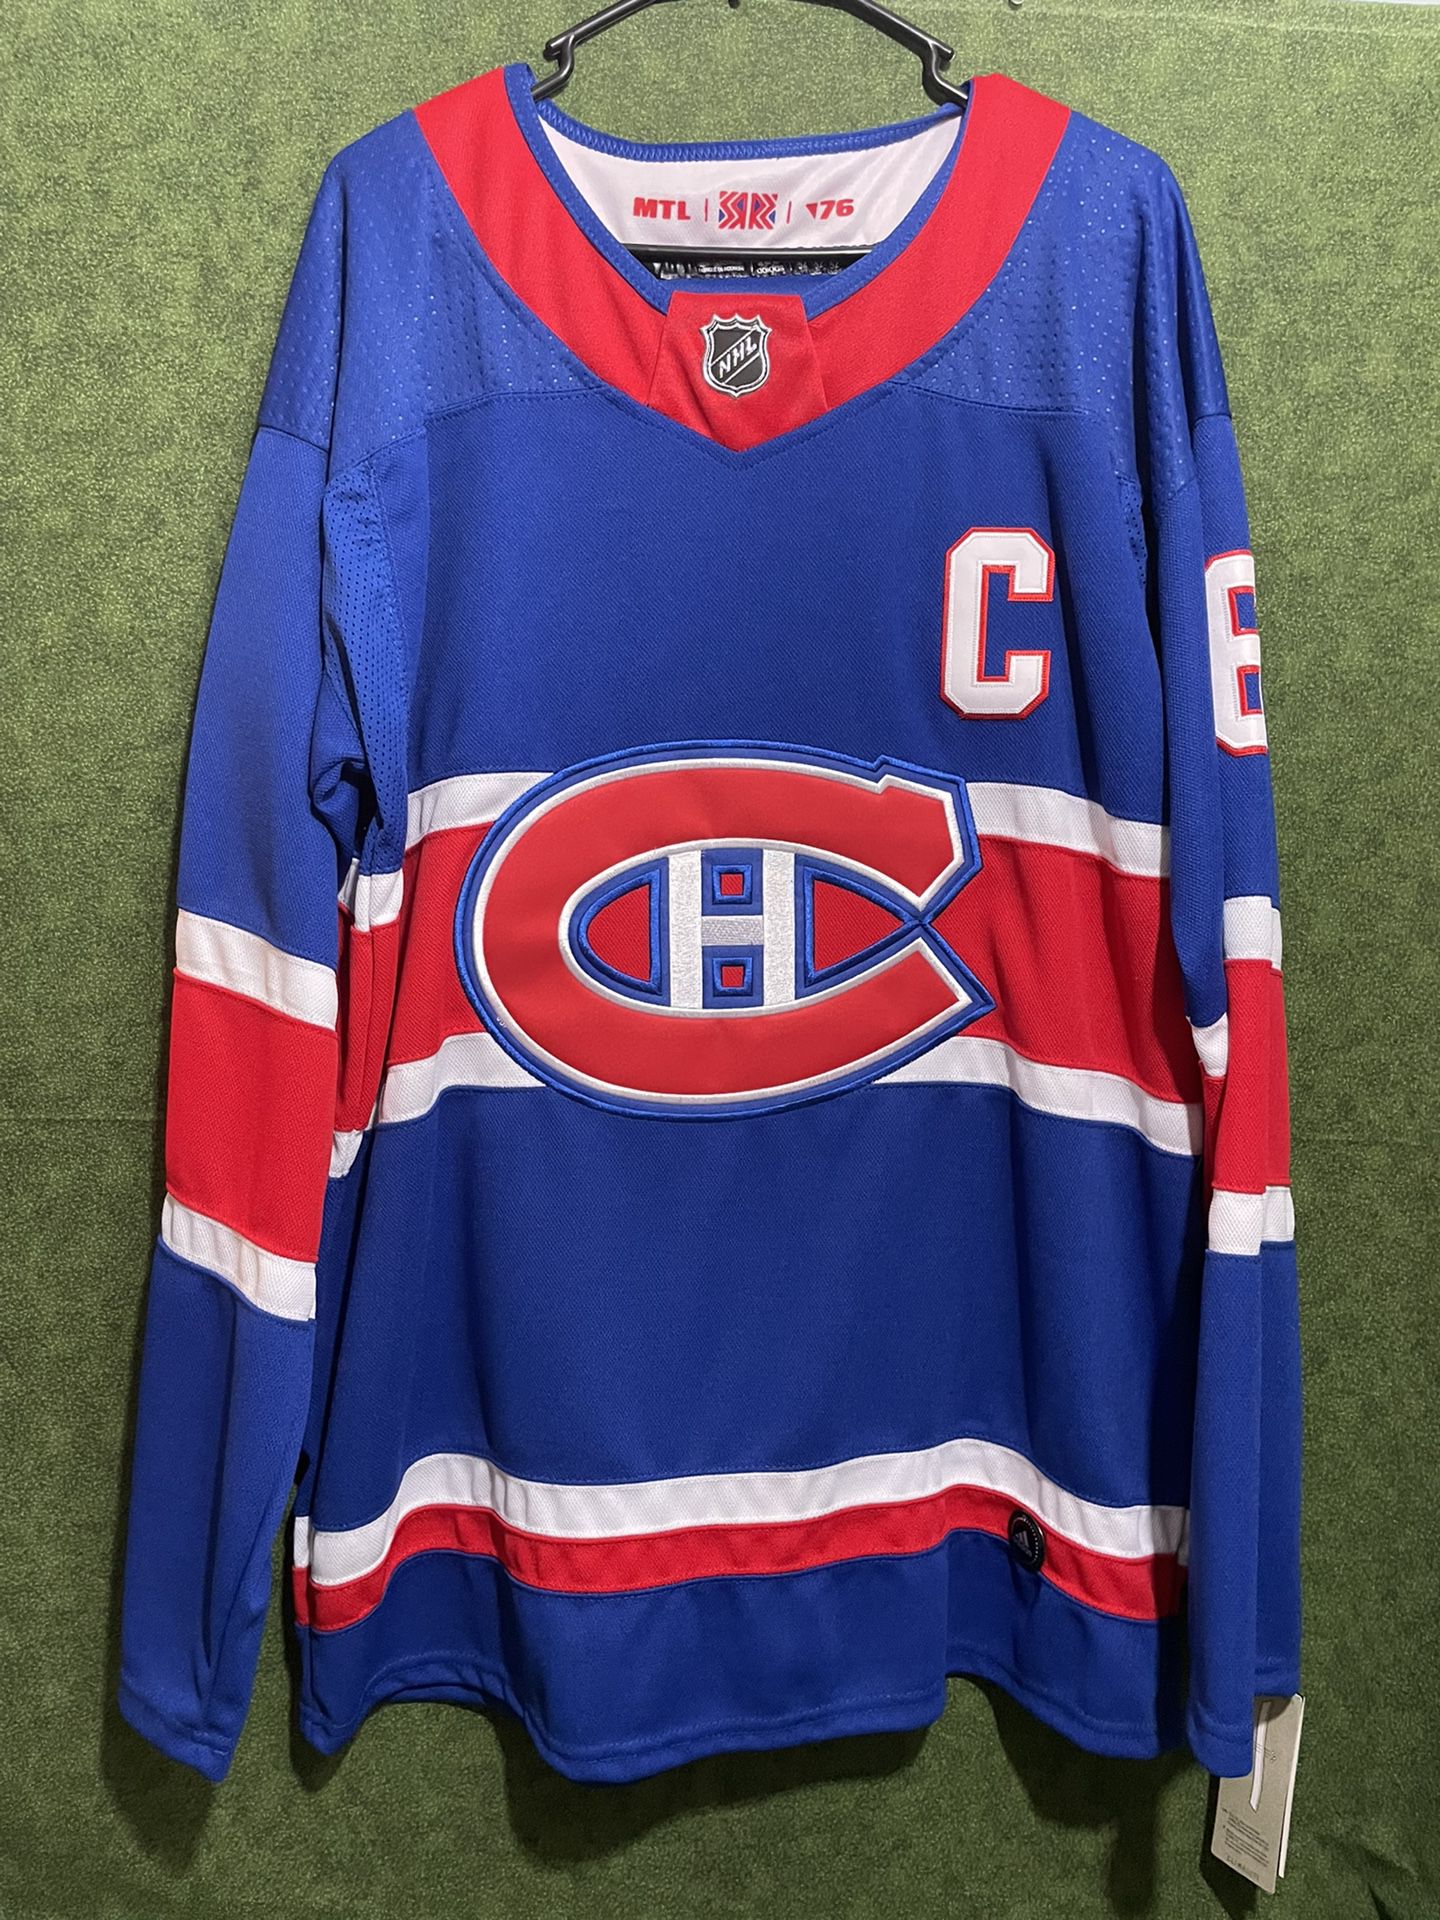 SHEA WEBER MONTREAL CANADIENS ADIDAS JERSEY BRAND NEW WITH TAGS SIZE LARGE 